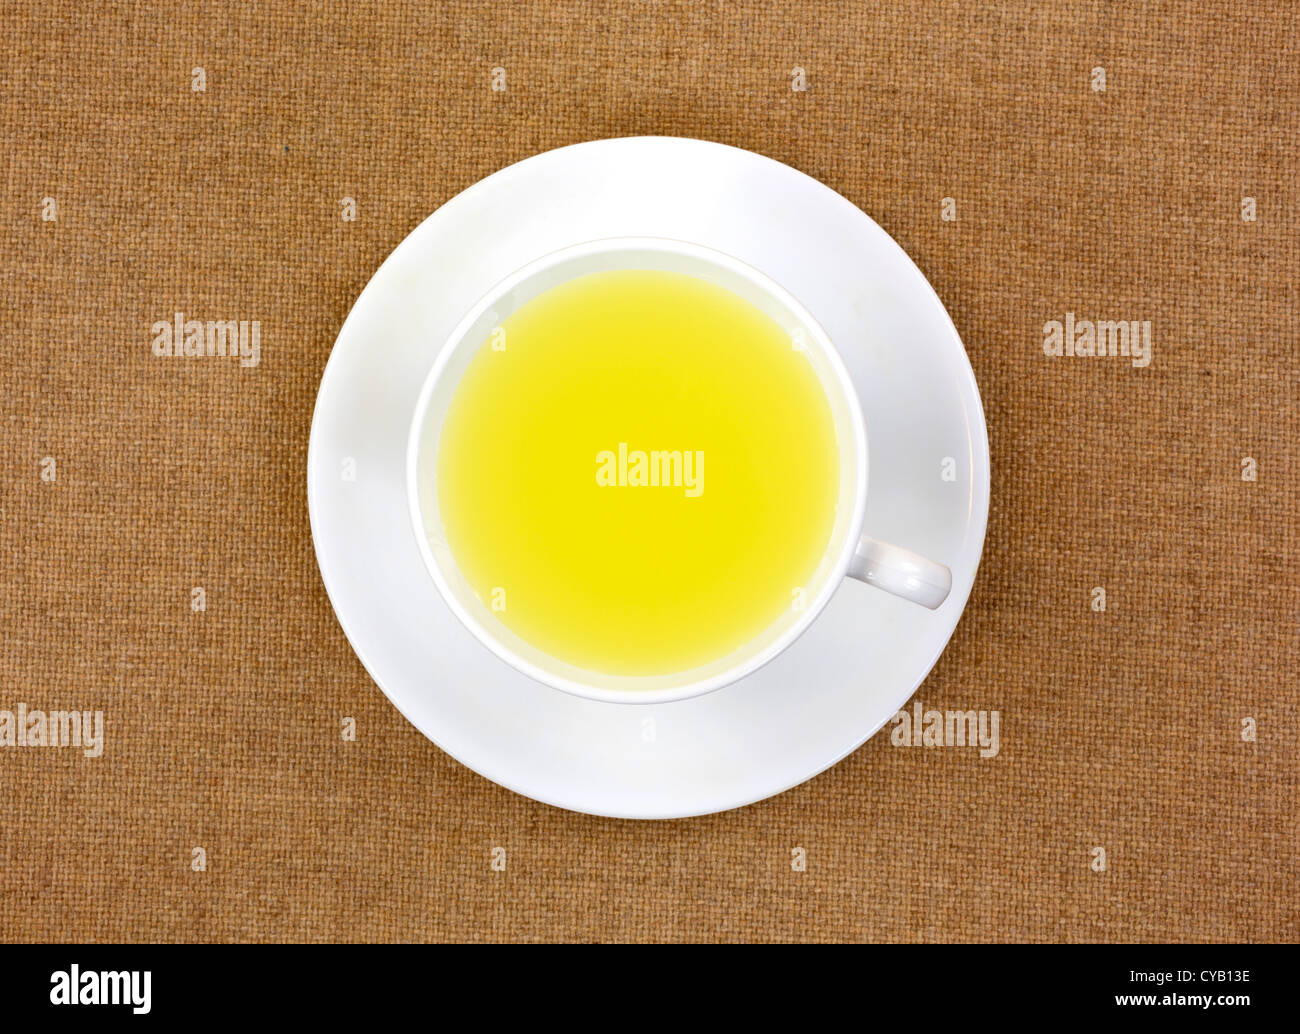 Top view of lemon juice in a white cup and saucer on a tan cloth background. Stock Photo